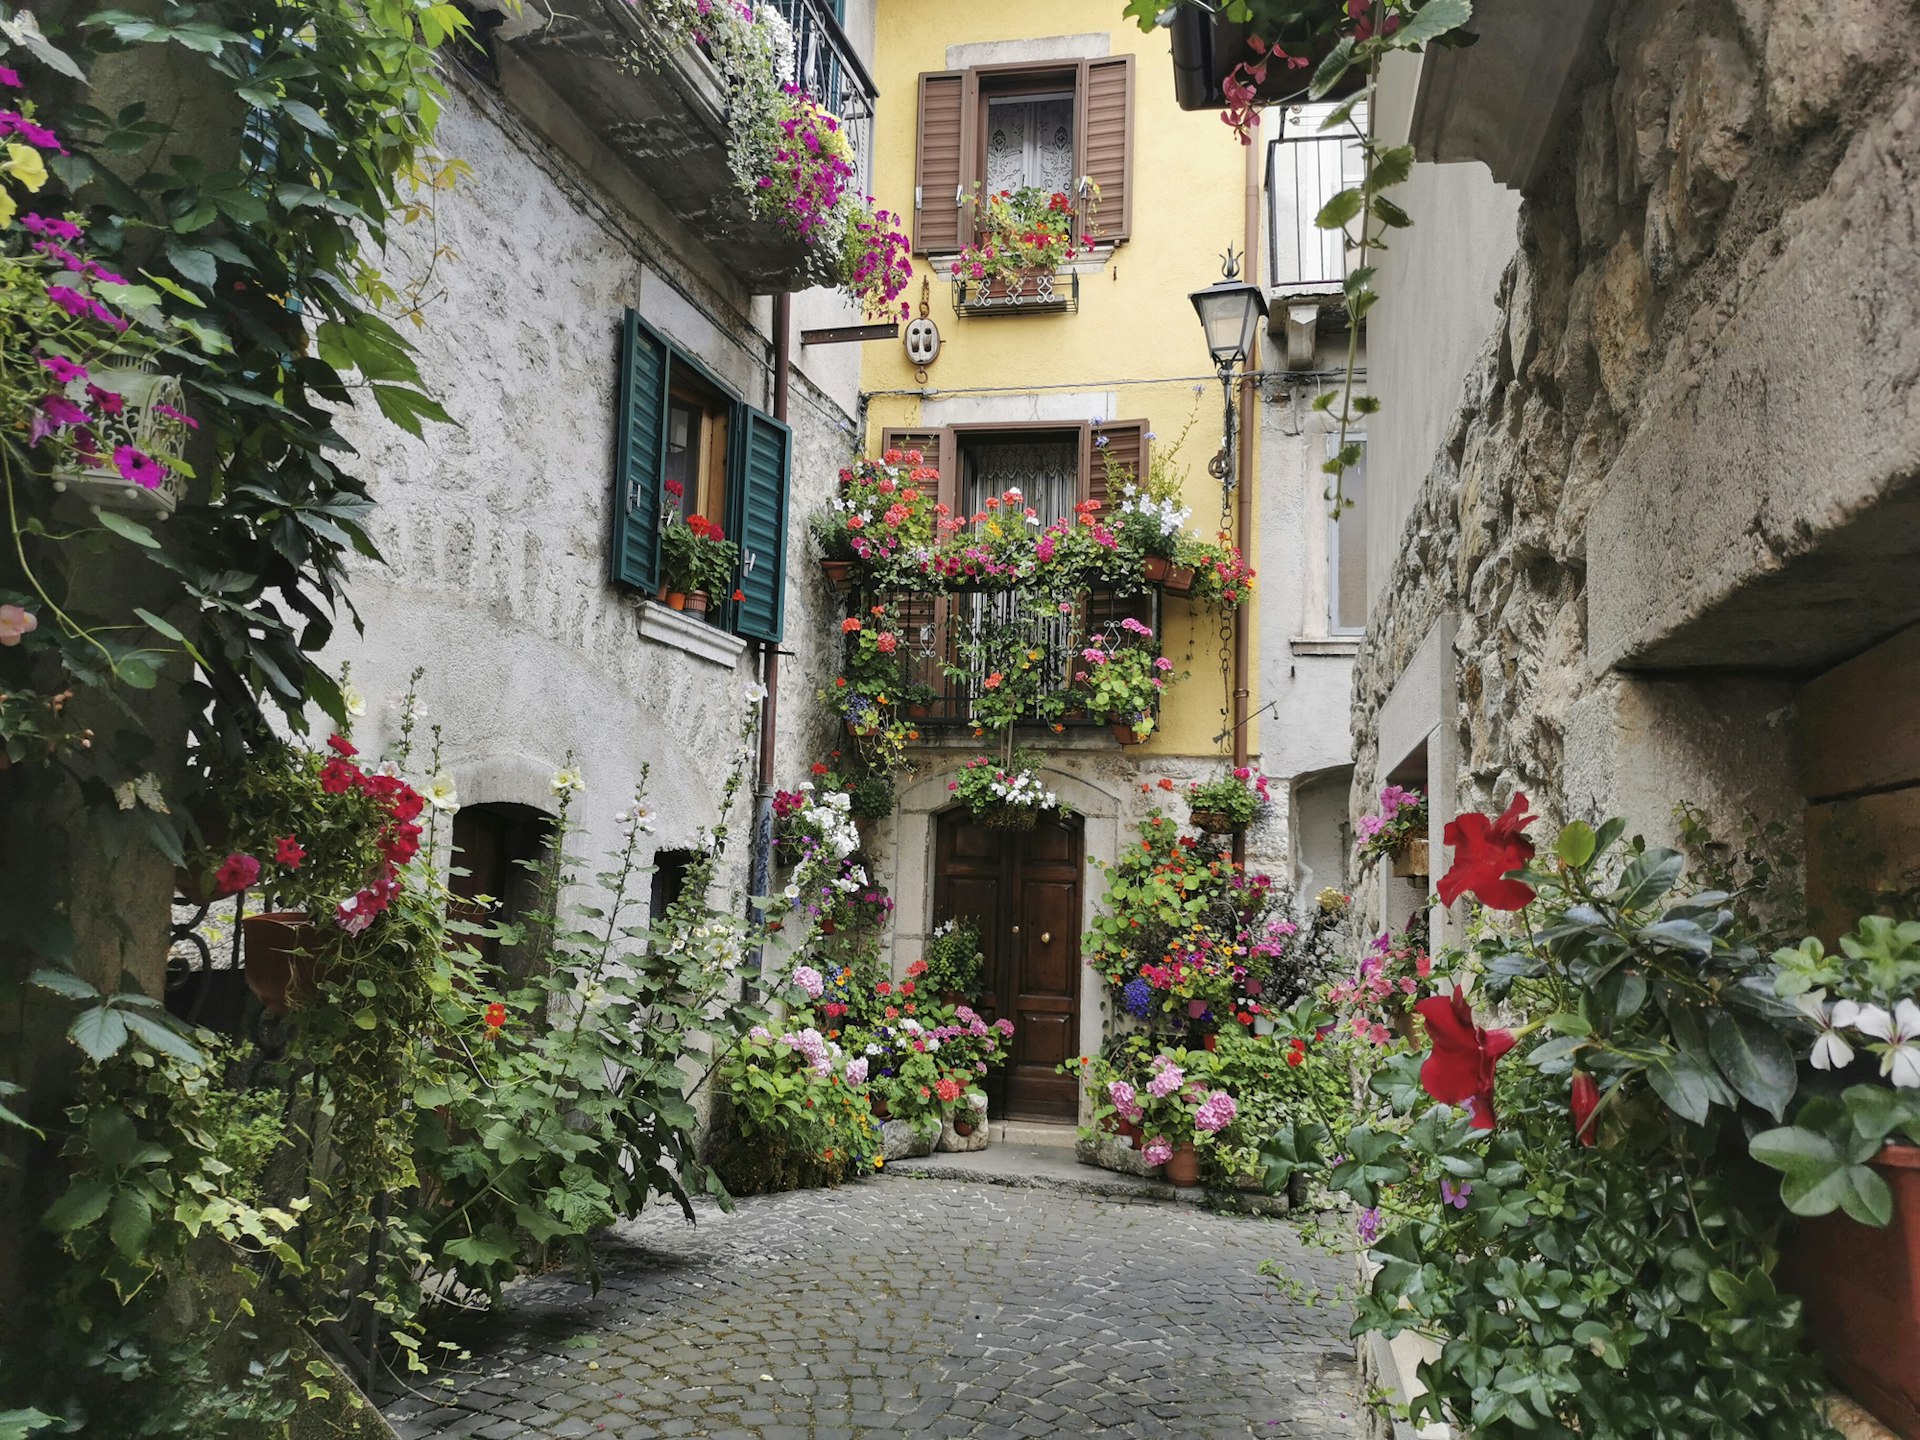 A series of white-stone village houses with pots of brightly colored flowers outside